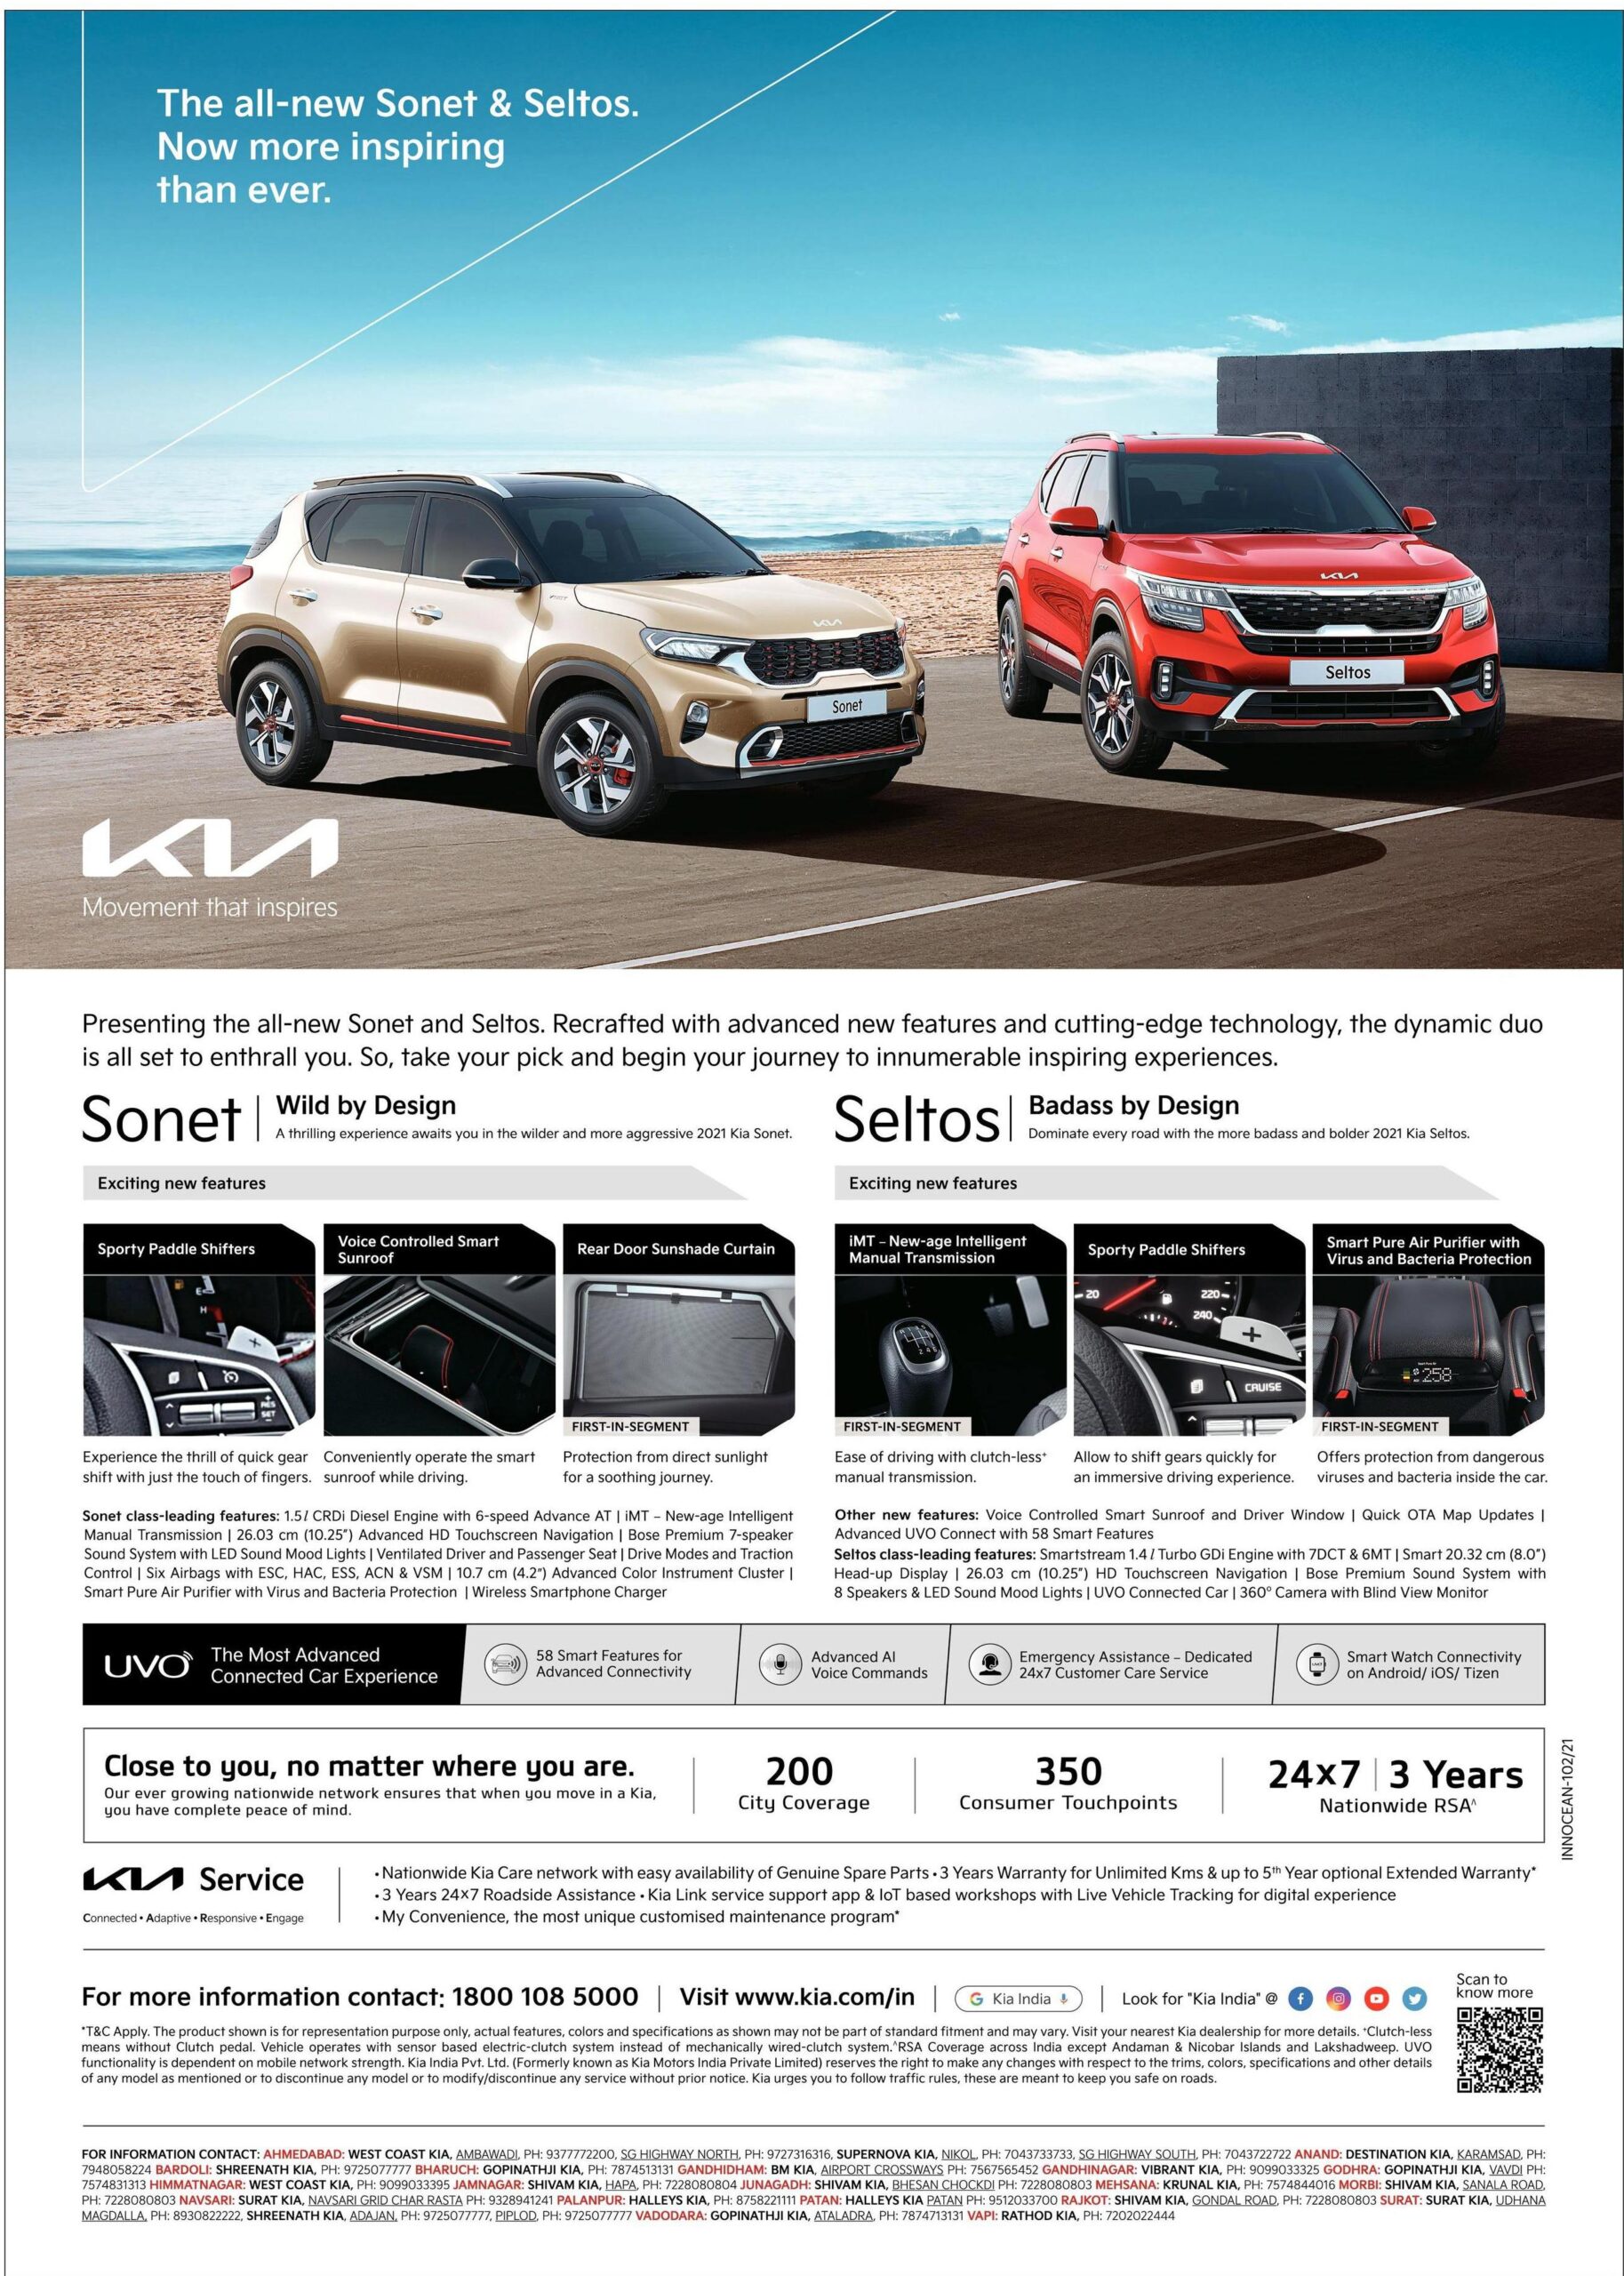 kia-the-all-new-sonet-and-seltos-now-more-inspiring-then-ever-ad-gujarat-samachar-ahmedabad-19-06-2021